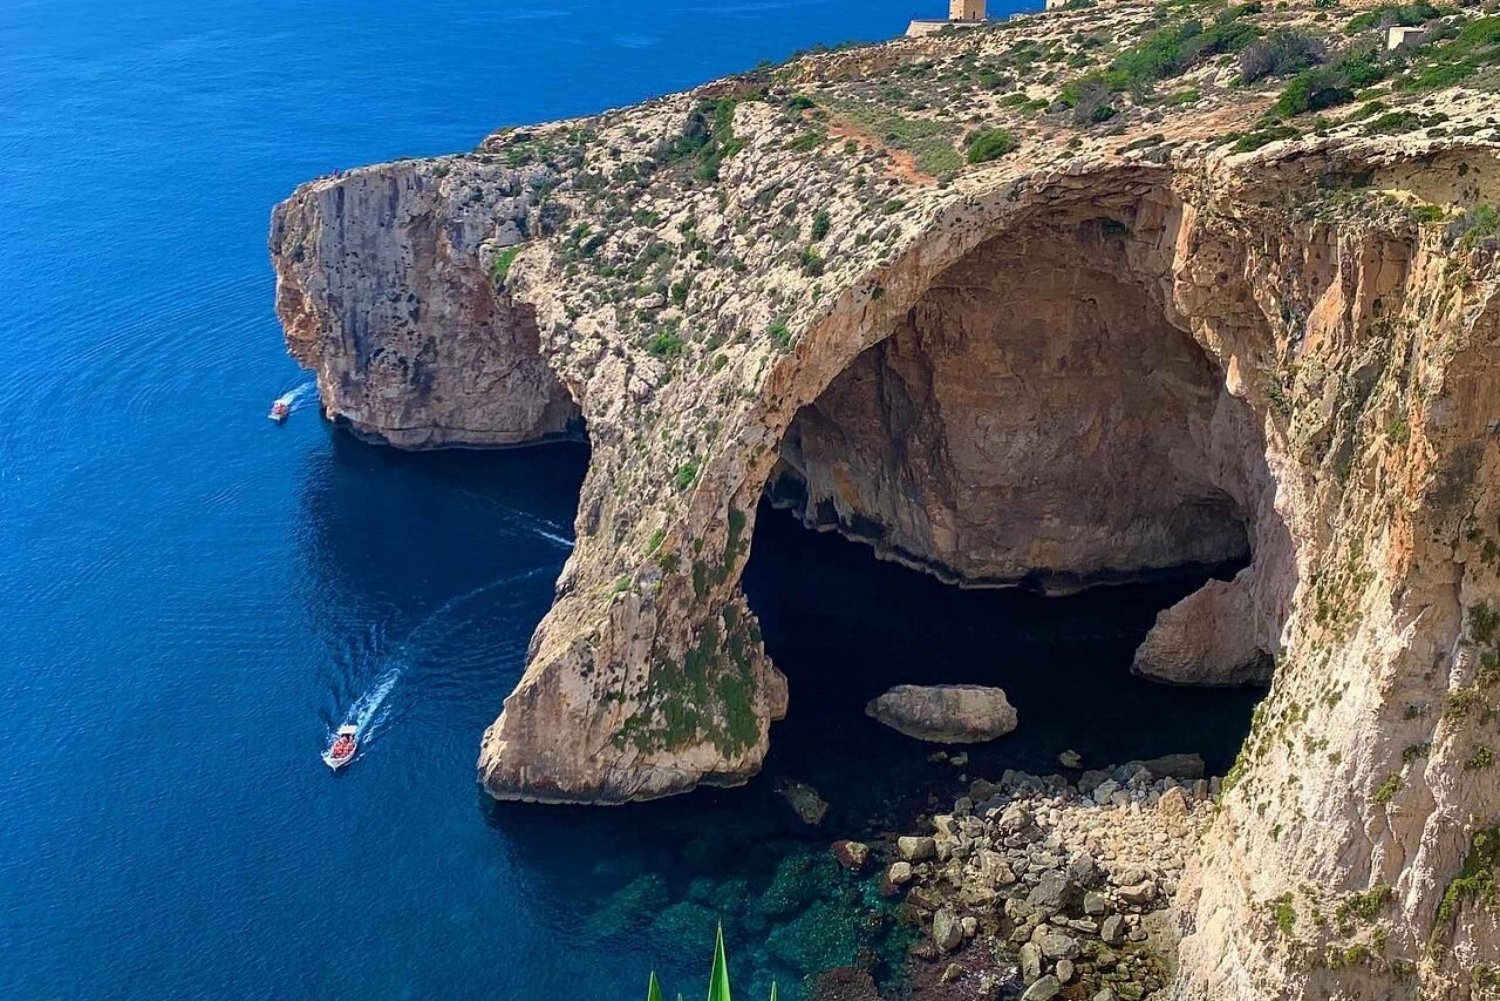 Adventures in Malta: Thrills, History, and Natural Beauty